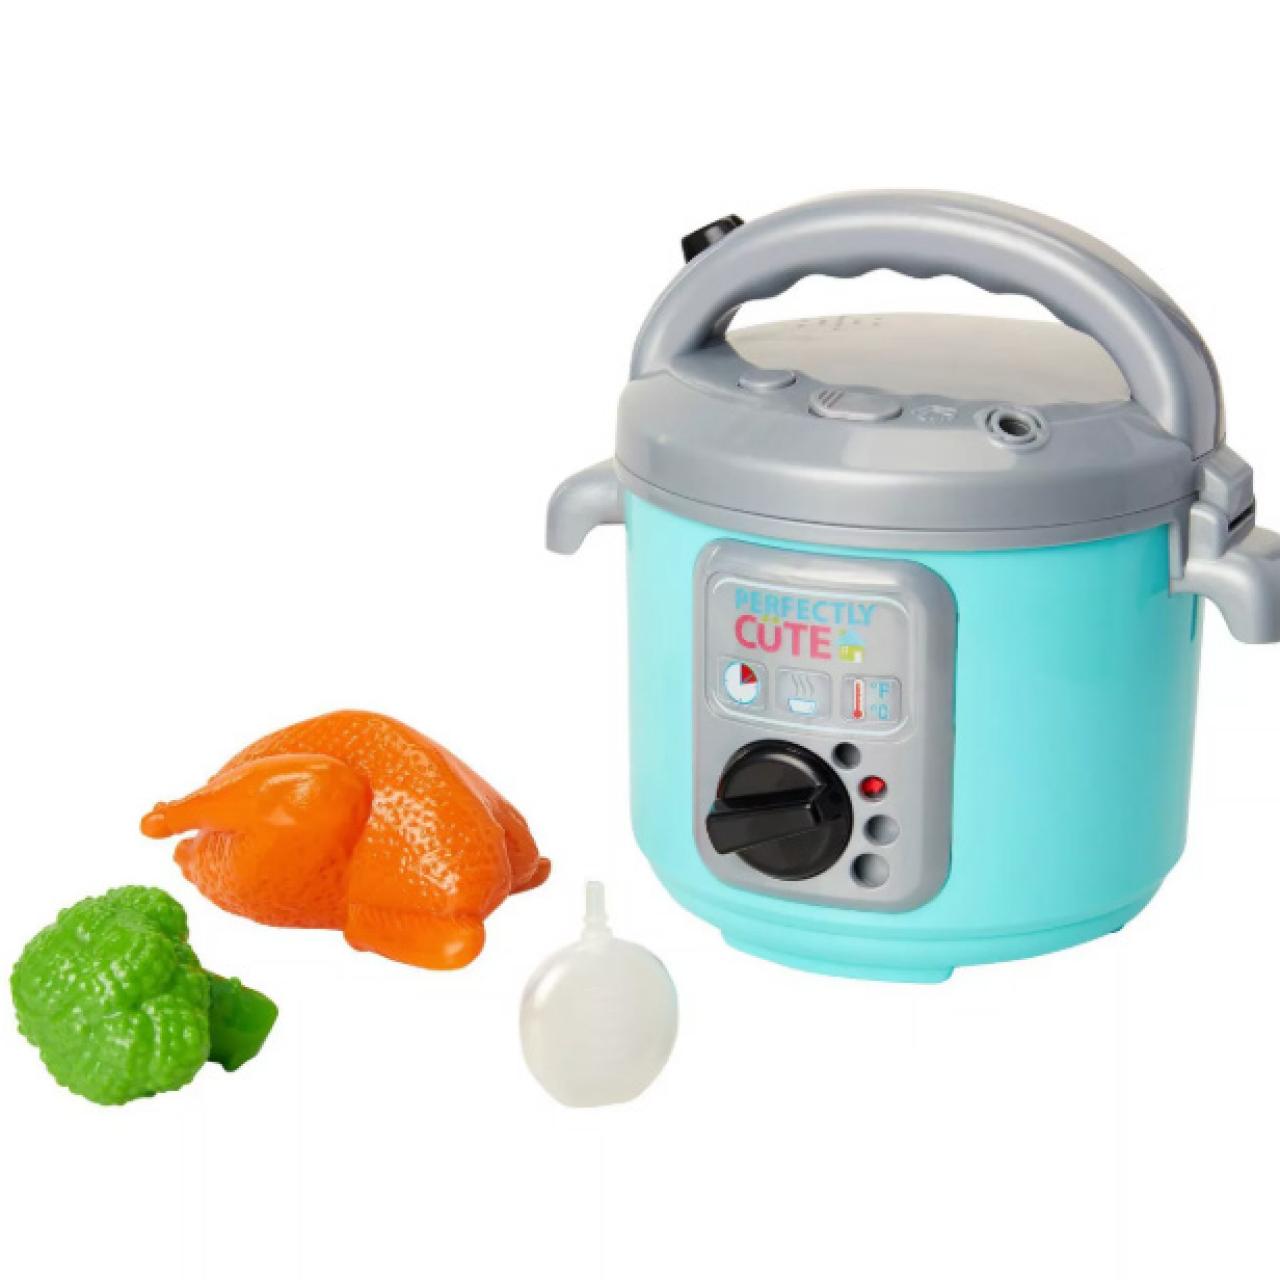 https://food.fnr.sndimg.com/content/dam/images/food/products/2019/8/5/rx_instant-pot-toy-silo.jpg.rend.hgtvcom.1280.1280.suffix/1565021255703.jpeg